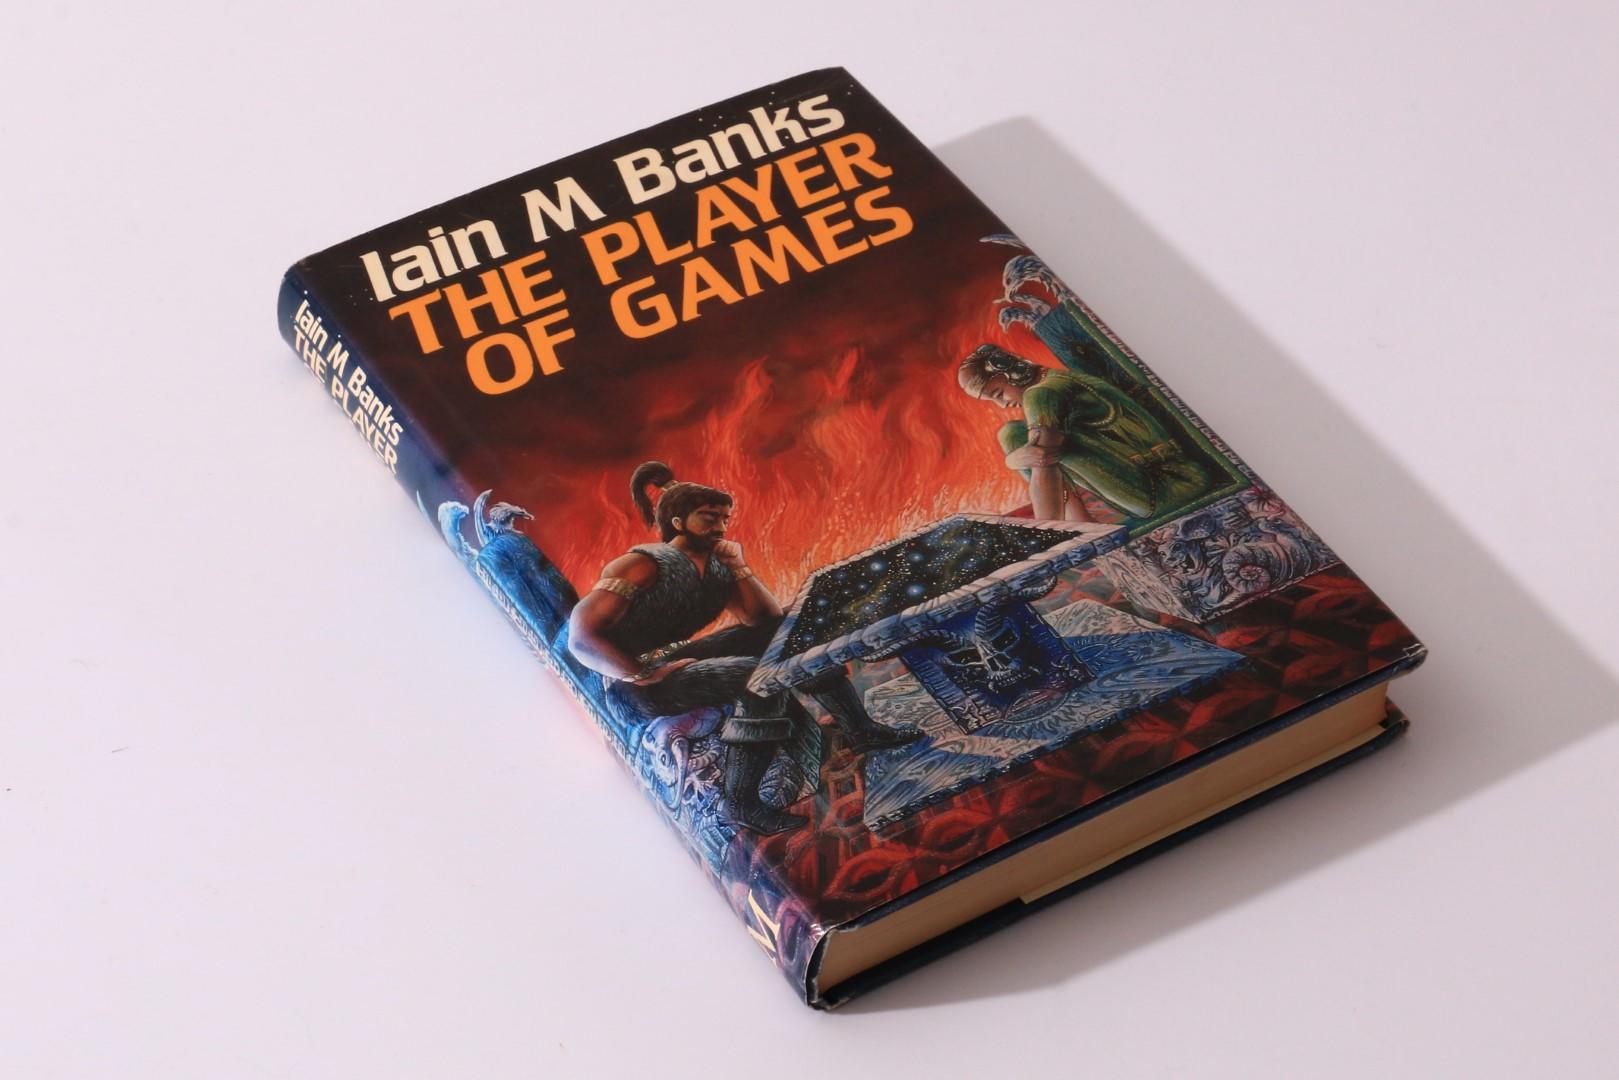 Iain M. Banks - The Player of Games - Macmillan, 1988, First Edition.